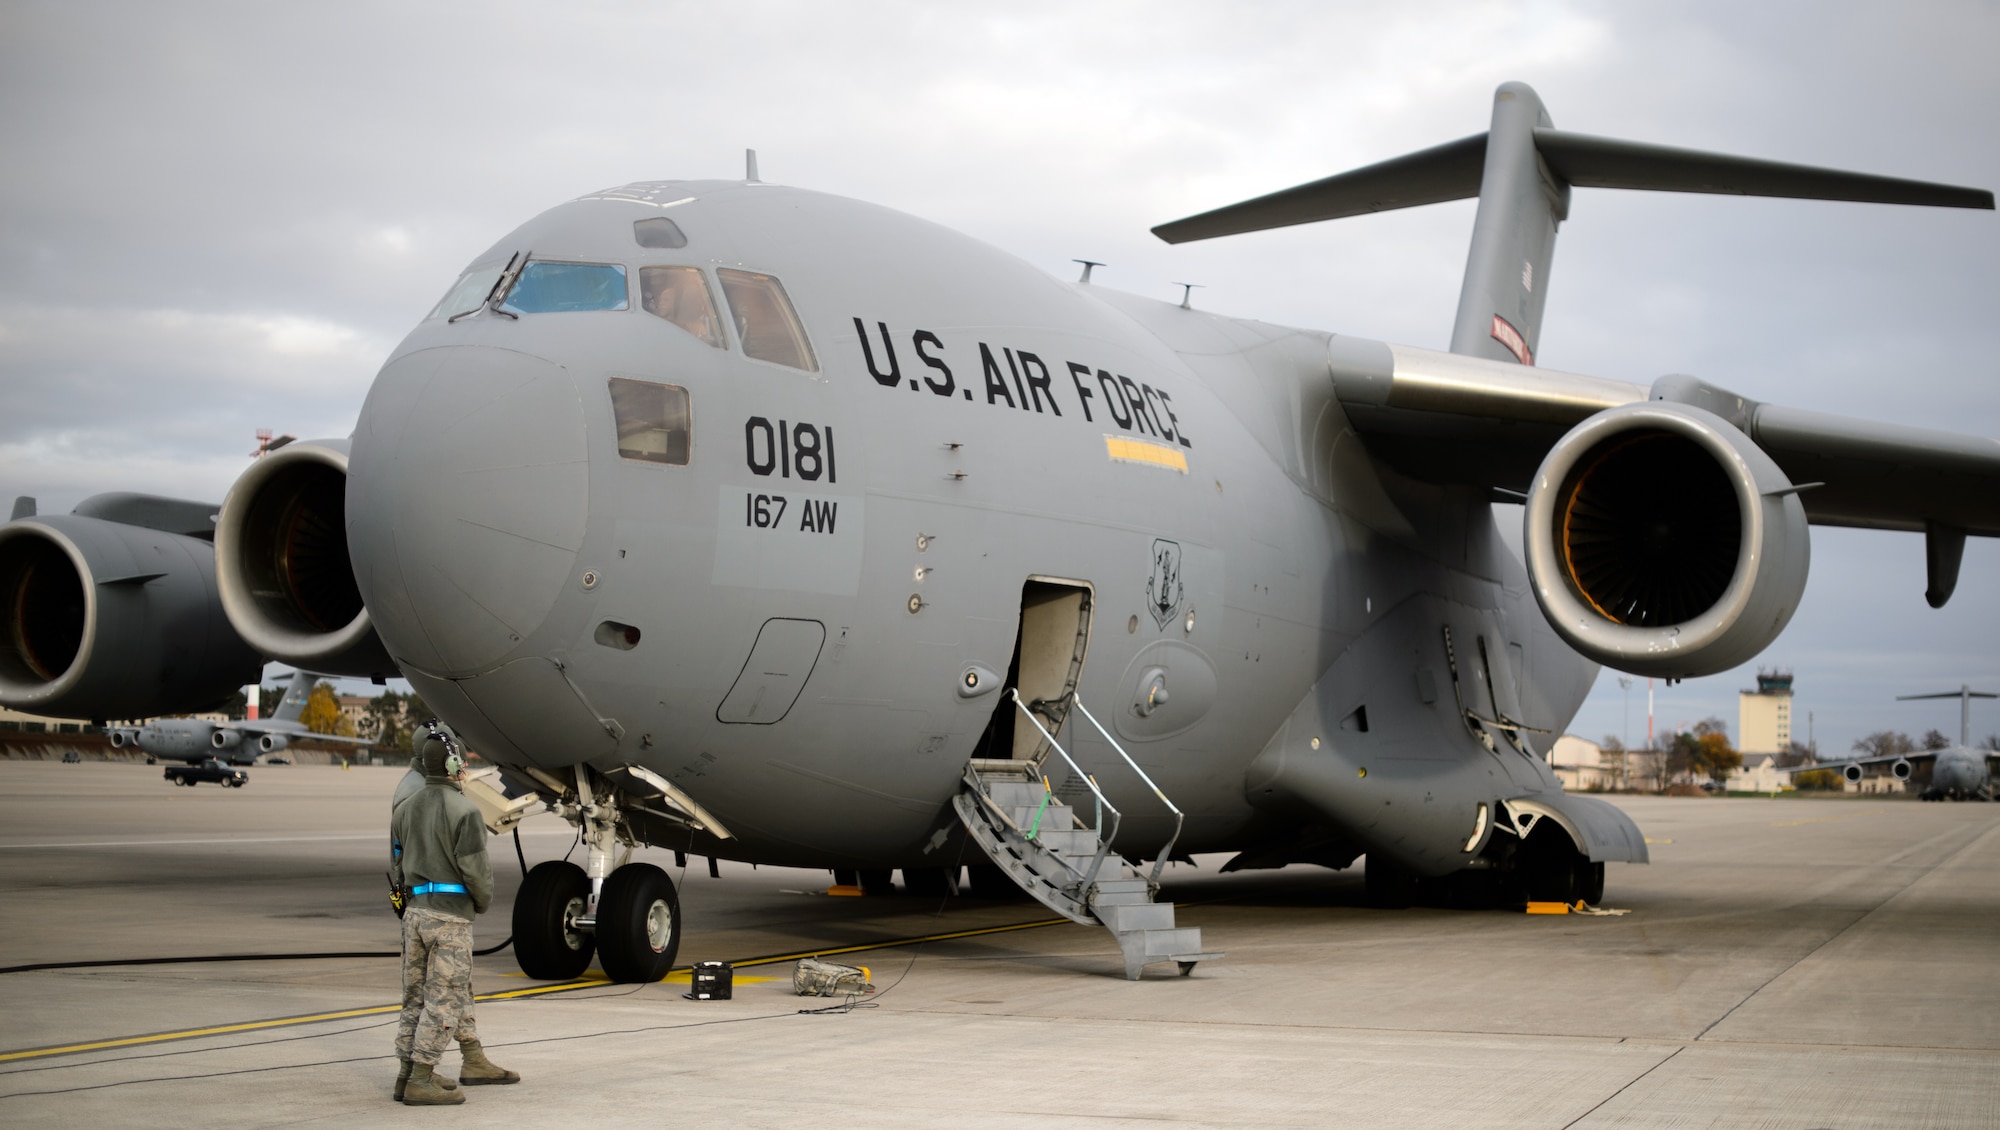 Crew chiefs from the 521st Air Mobility Operations Wing stand beside a C-17 Globemaster III prior to an aeromedical evacuation mission Nov. 10, 2015, at Ramstein Air Base, Germany. The 521st AMOW, including the 10th Expeditionary Aeromedical Evacuation Flight, conducts regular missions to the U.S. Central Command area of operation to return wounded warriors home. (U.S. Air Force photo/Staff Sgt. Armando A. Schwier-Morales)